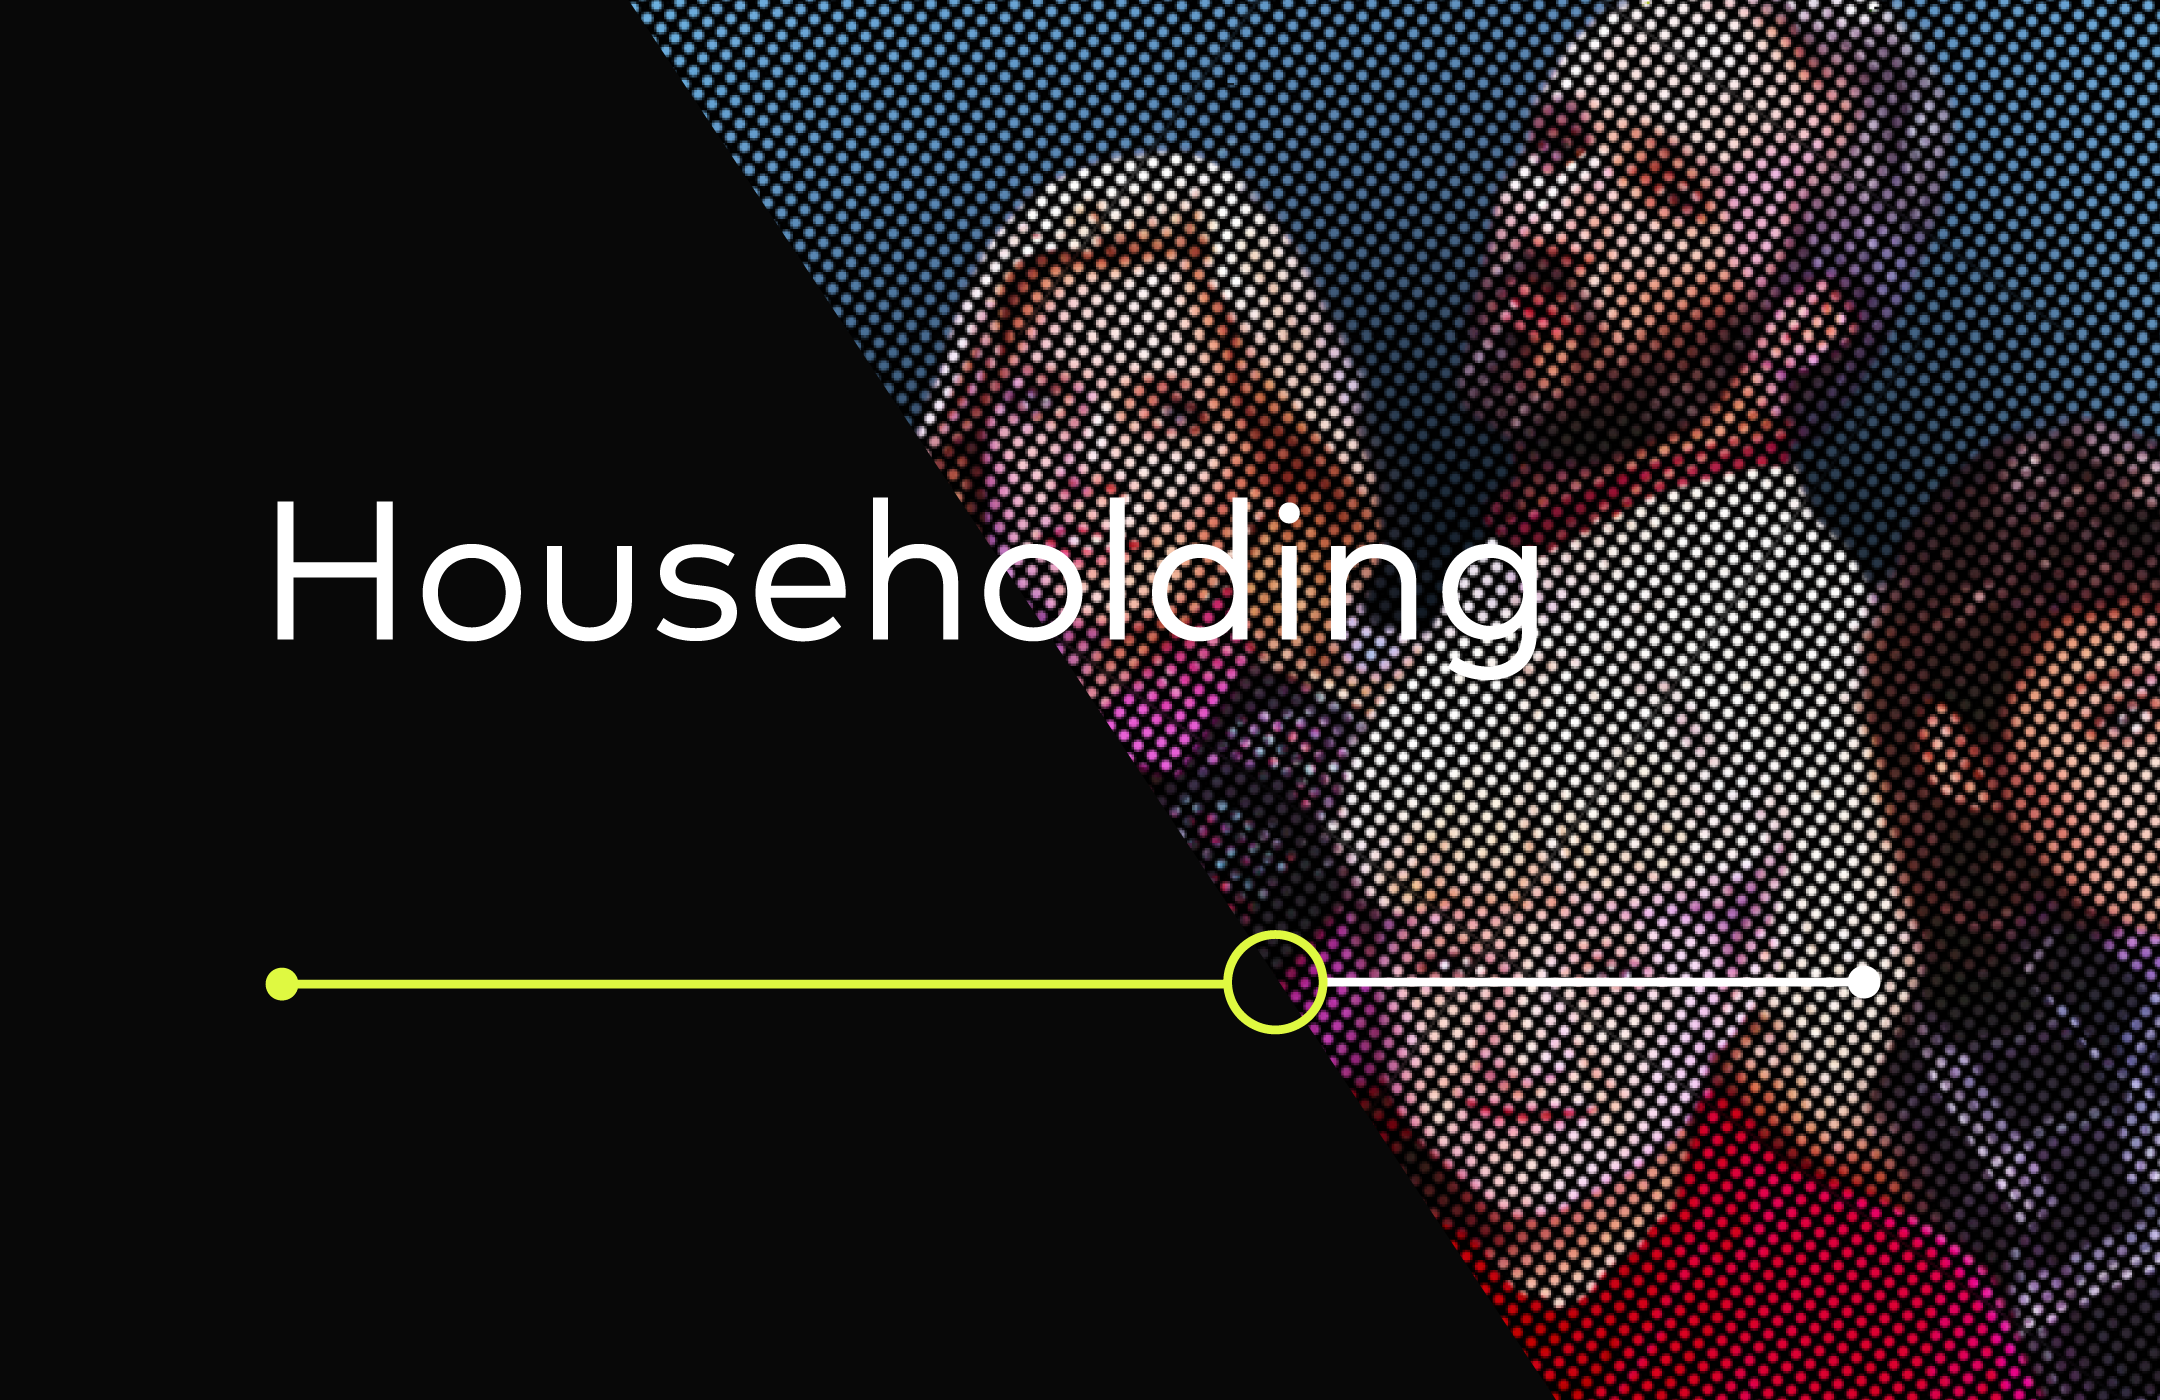 Image with household in the back with word: Householding. 